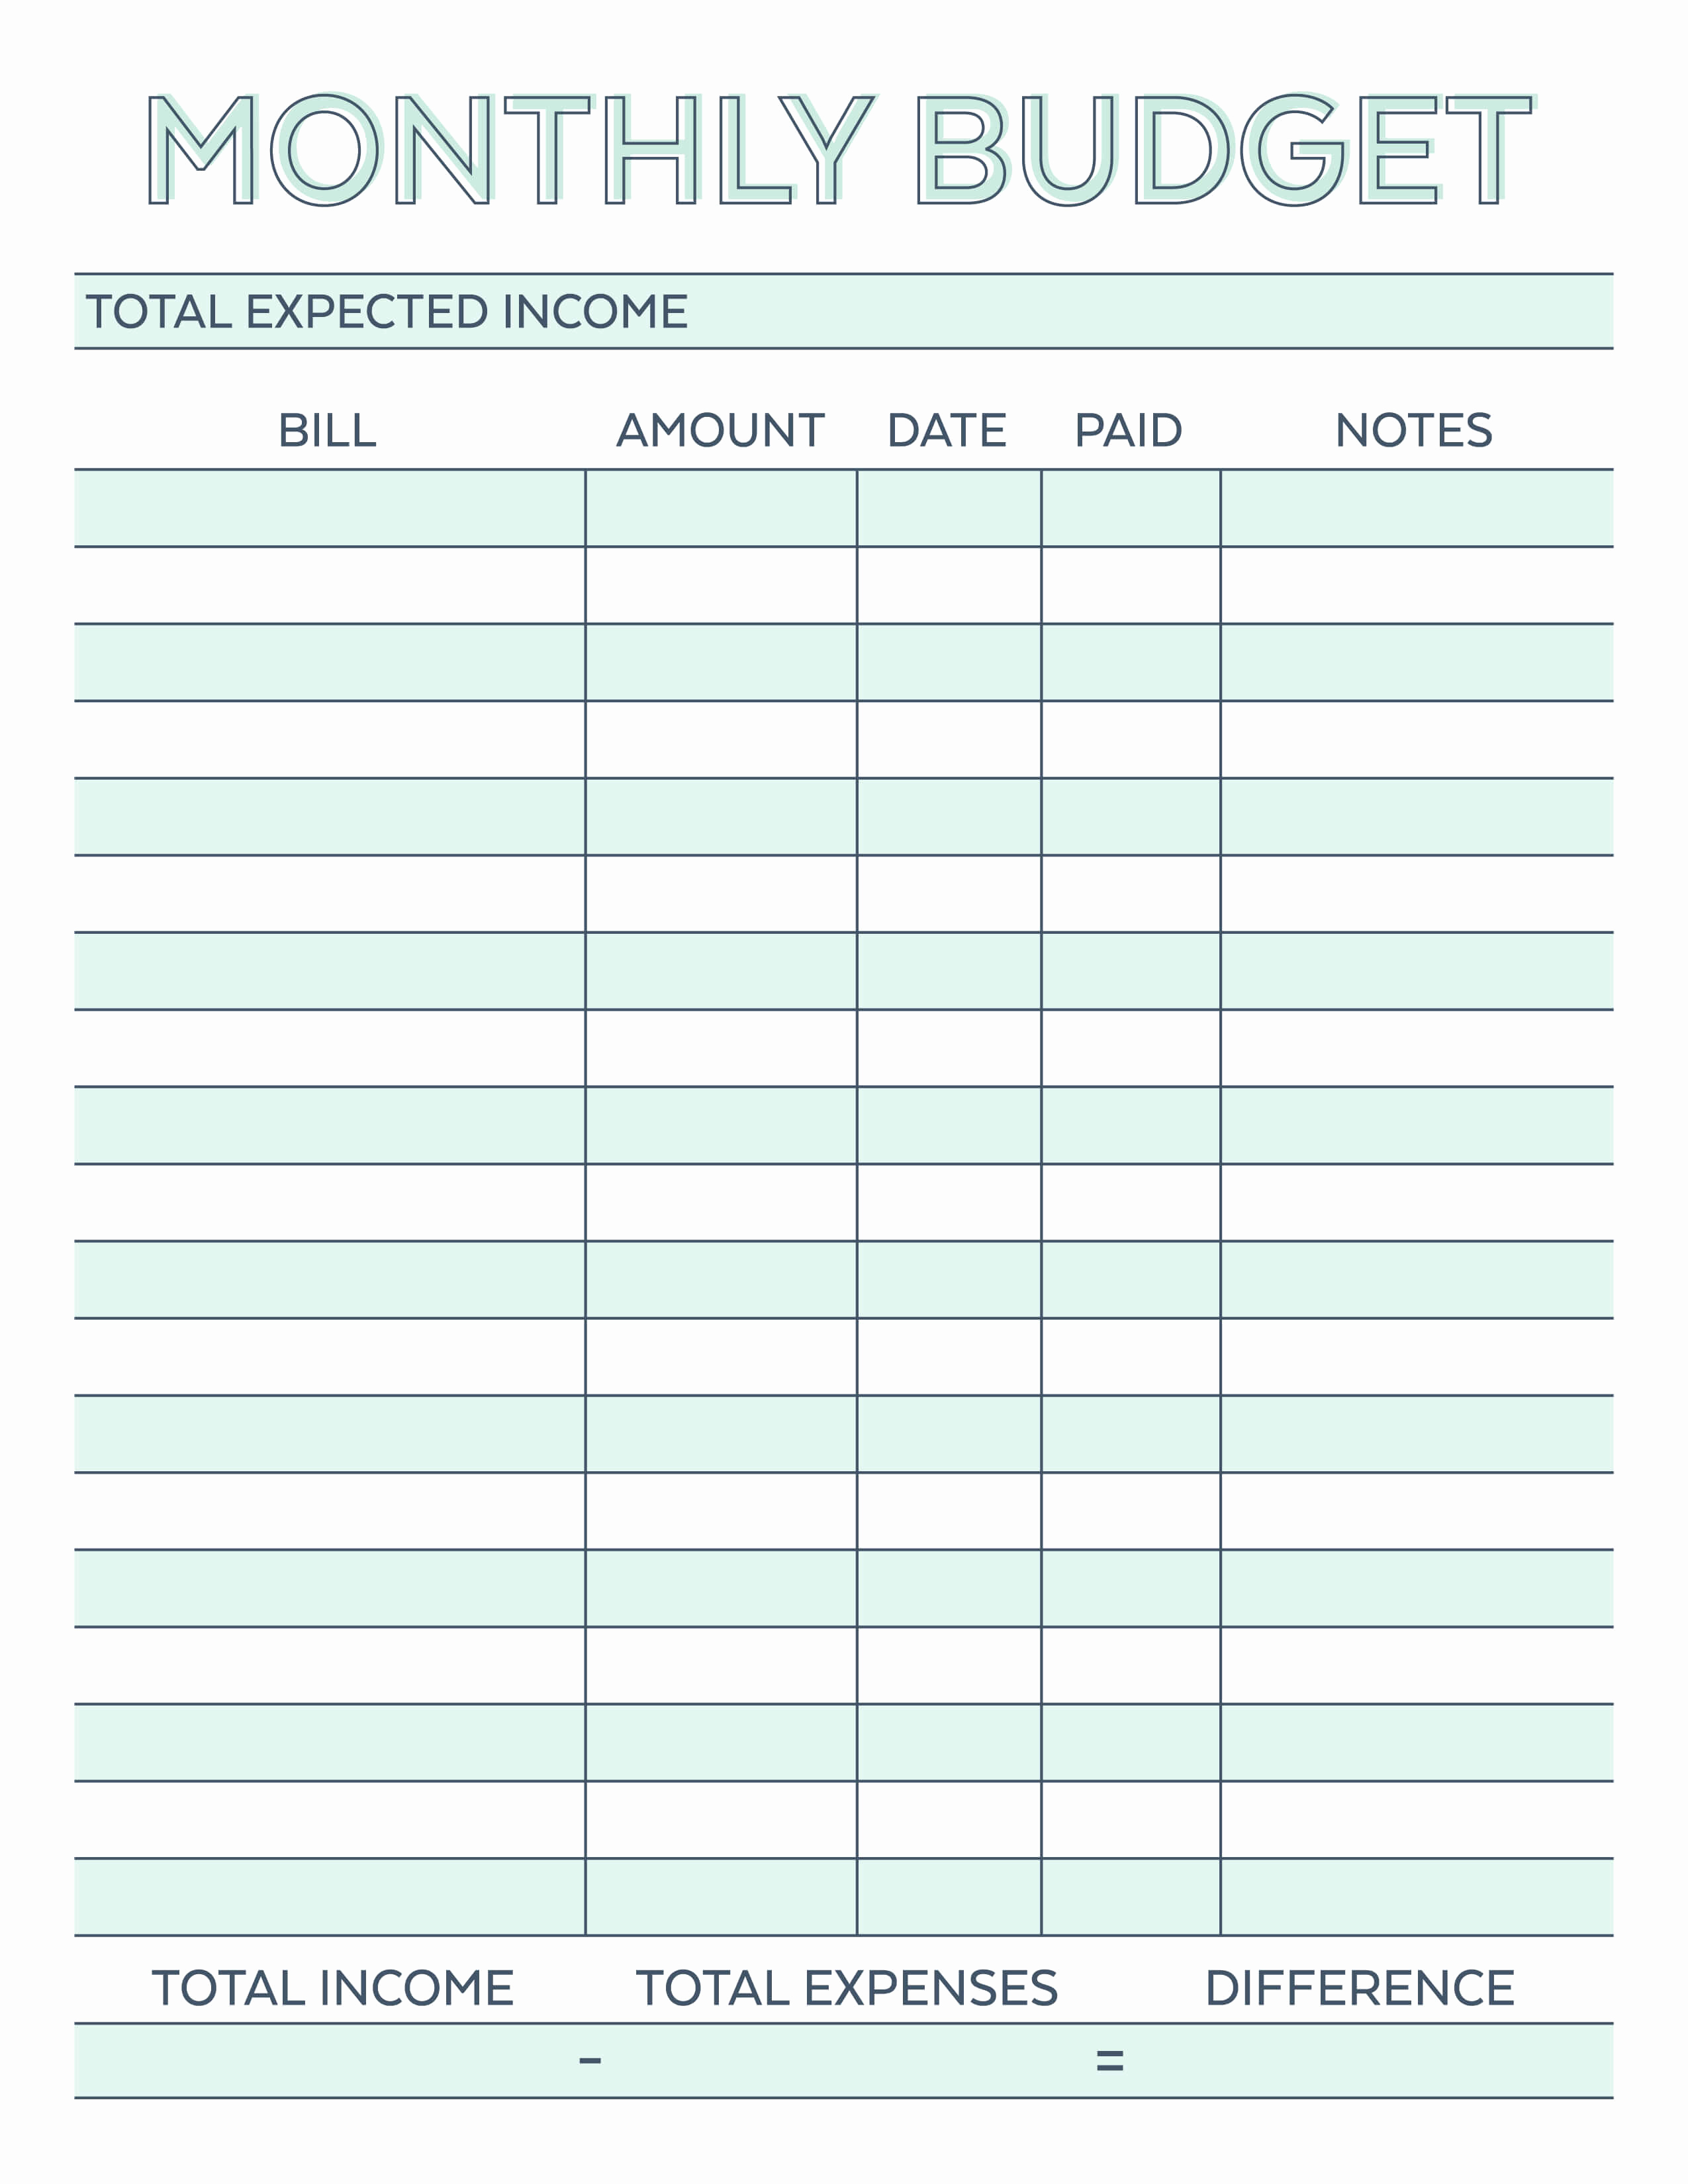 Monthly Budget Planner Template Unique Monthly Bud Planner Free Printable Bud Worksheet